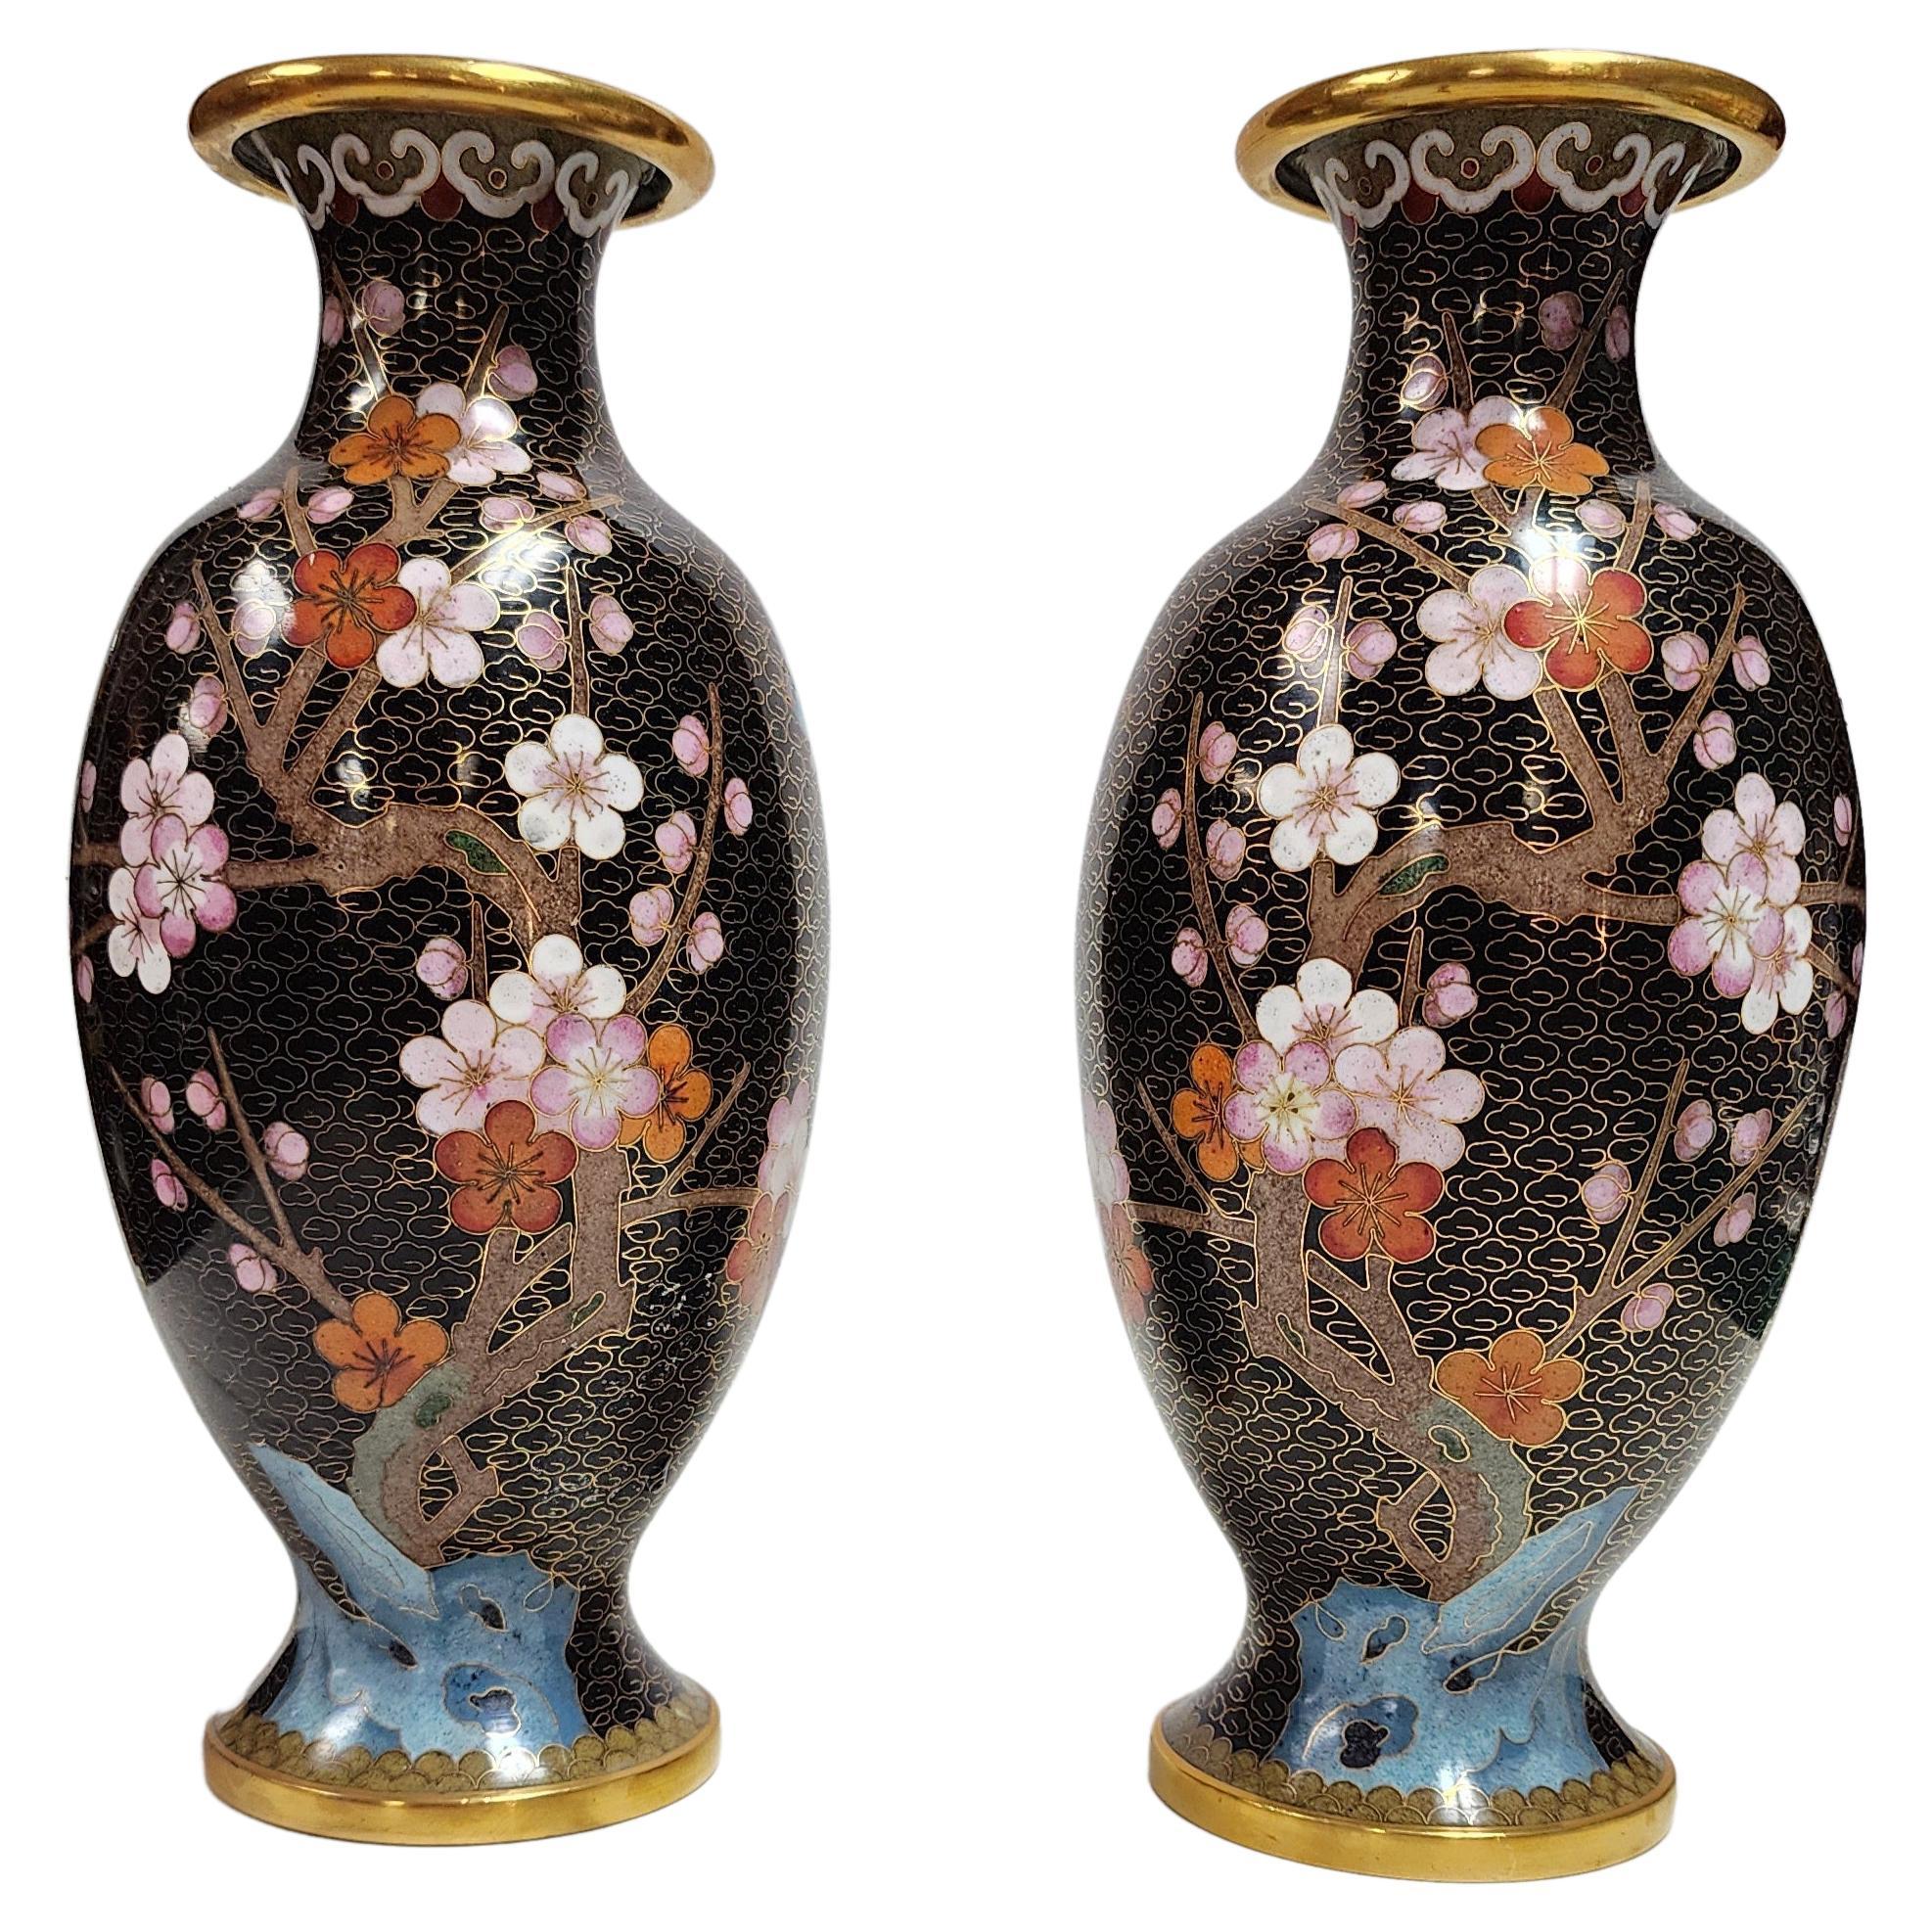 Pair of Mirrored Chinese Cloisonne Enamel Vase with Flower and Bird Motif For Sale